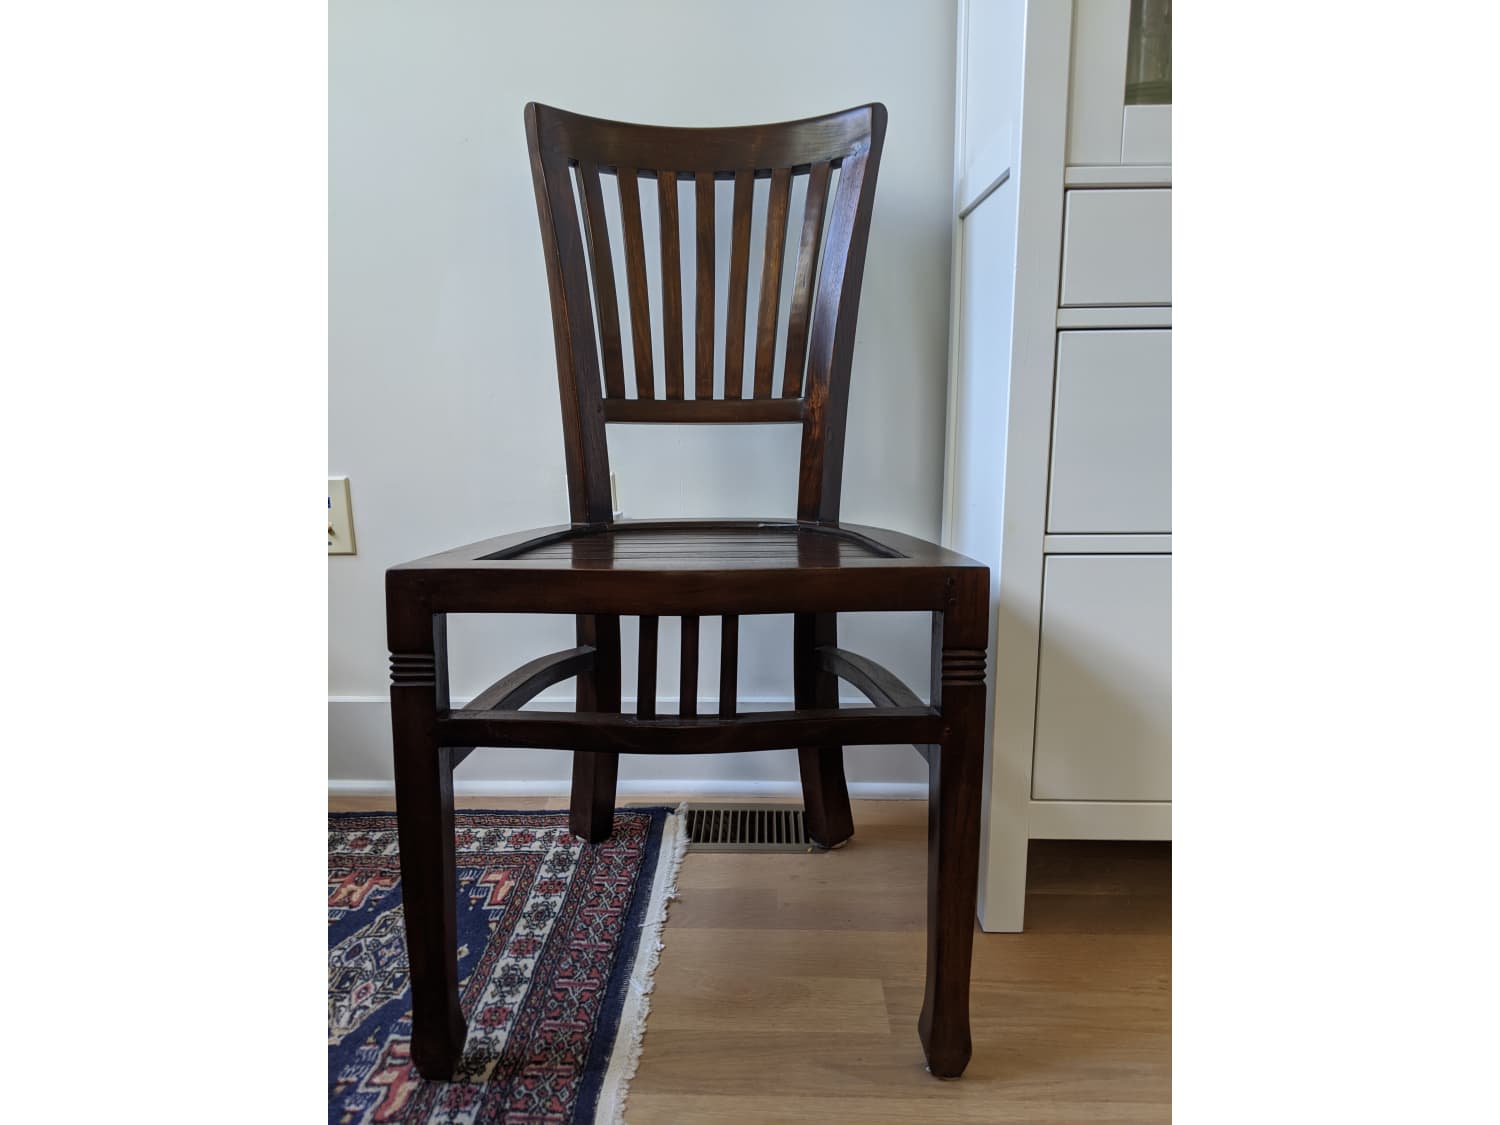 Dining Chair Set (6 chairs) - Apartment Therapy's Bazaar.